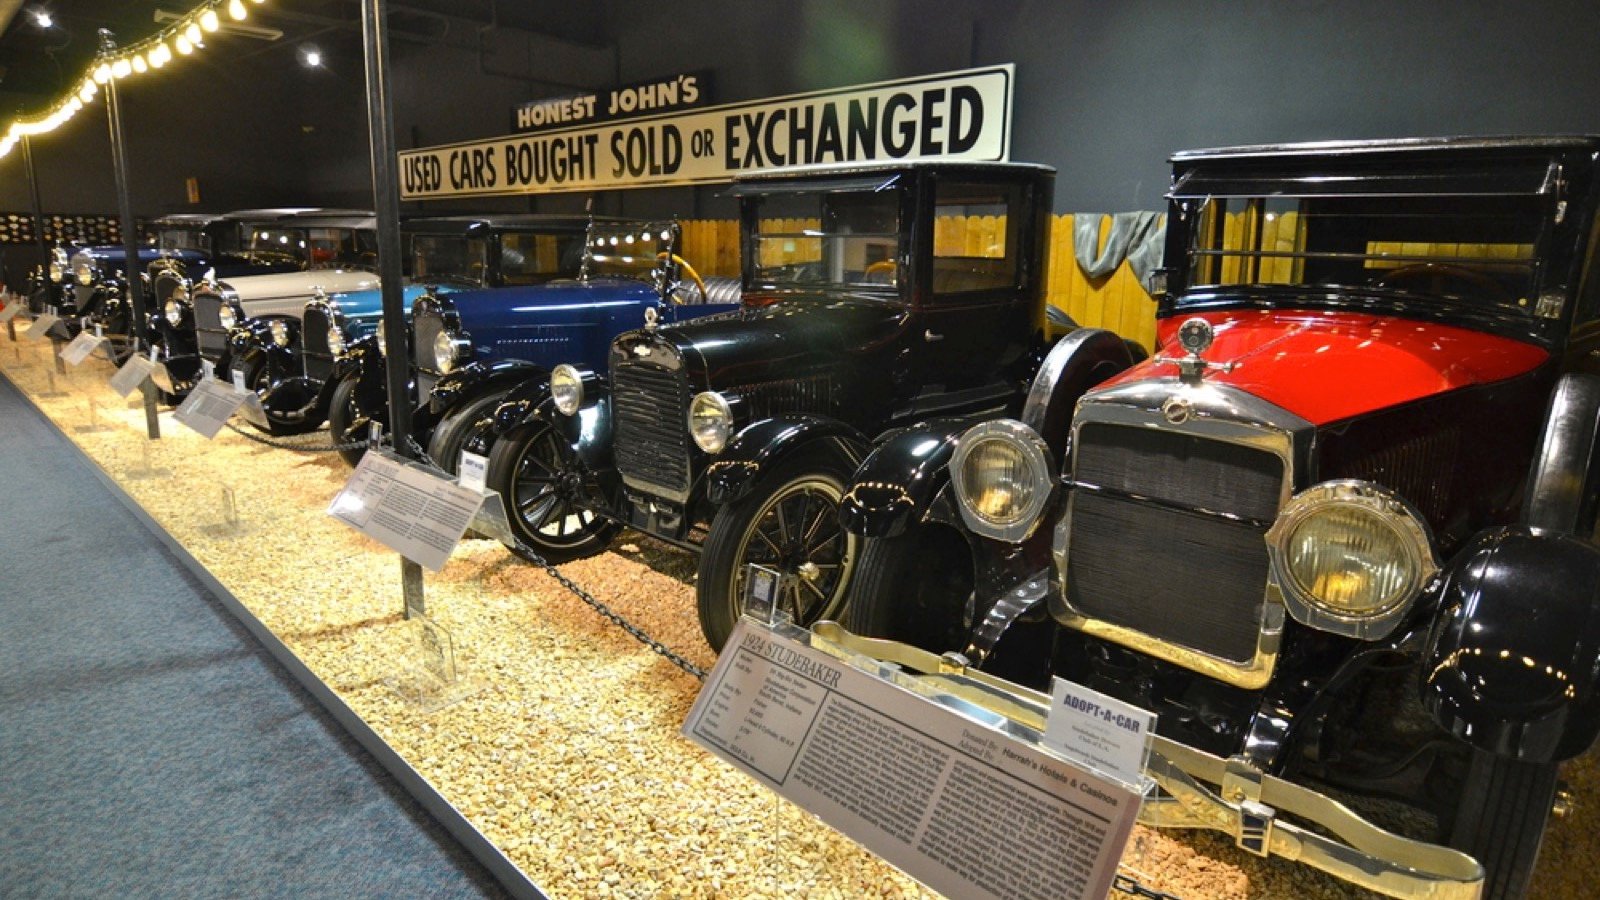 <p>The National Automobile Museum in Reno is a car lovers paradise. You and your family will have a blast checking out over 200 rare and one-of-a-kind automobiles from the past century. There is even a kid’s interactive area with life-sized Lightning McQueen and Tow Mater from the Walt Disney and Pixar Studios movie Cars.</p>